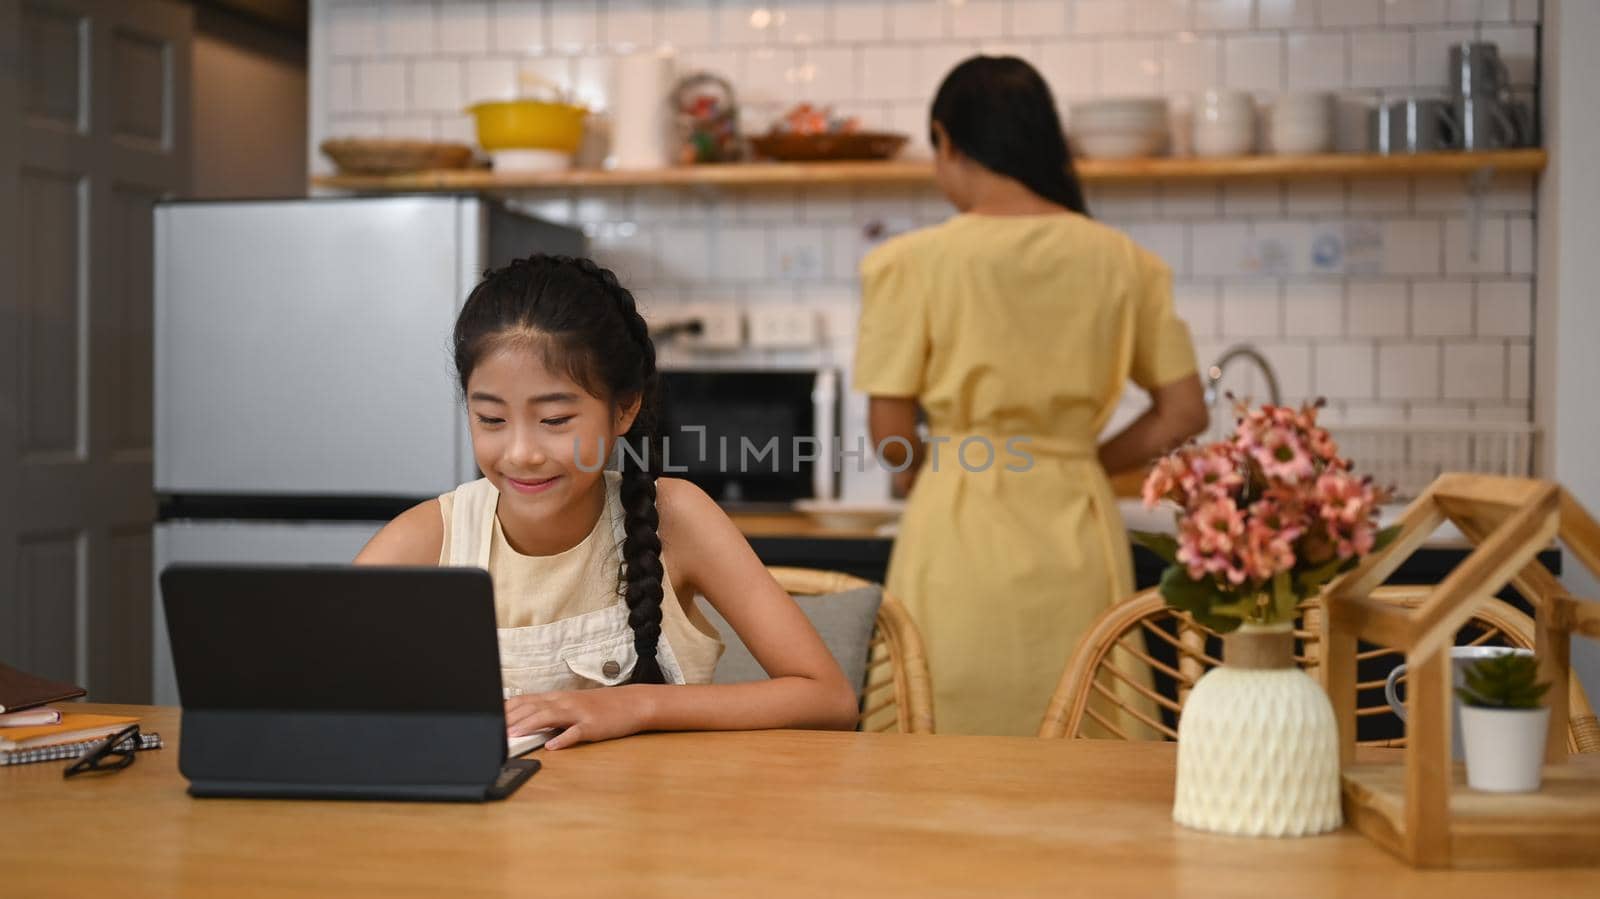 Asian girl having online class on computer tablet, doing homework at kitchen table. Concept of virtual education, homeschooling by prathanchorruangsak